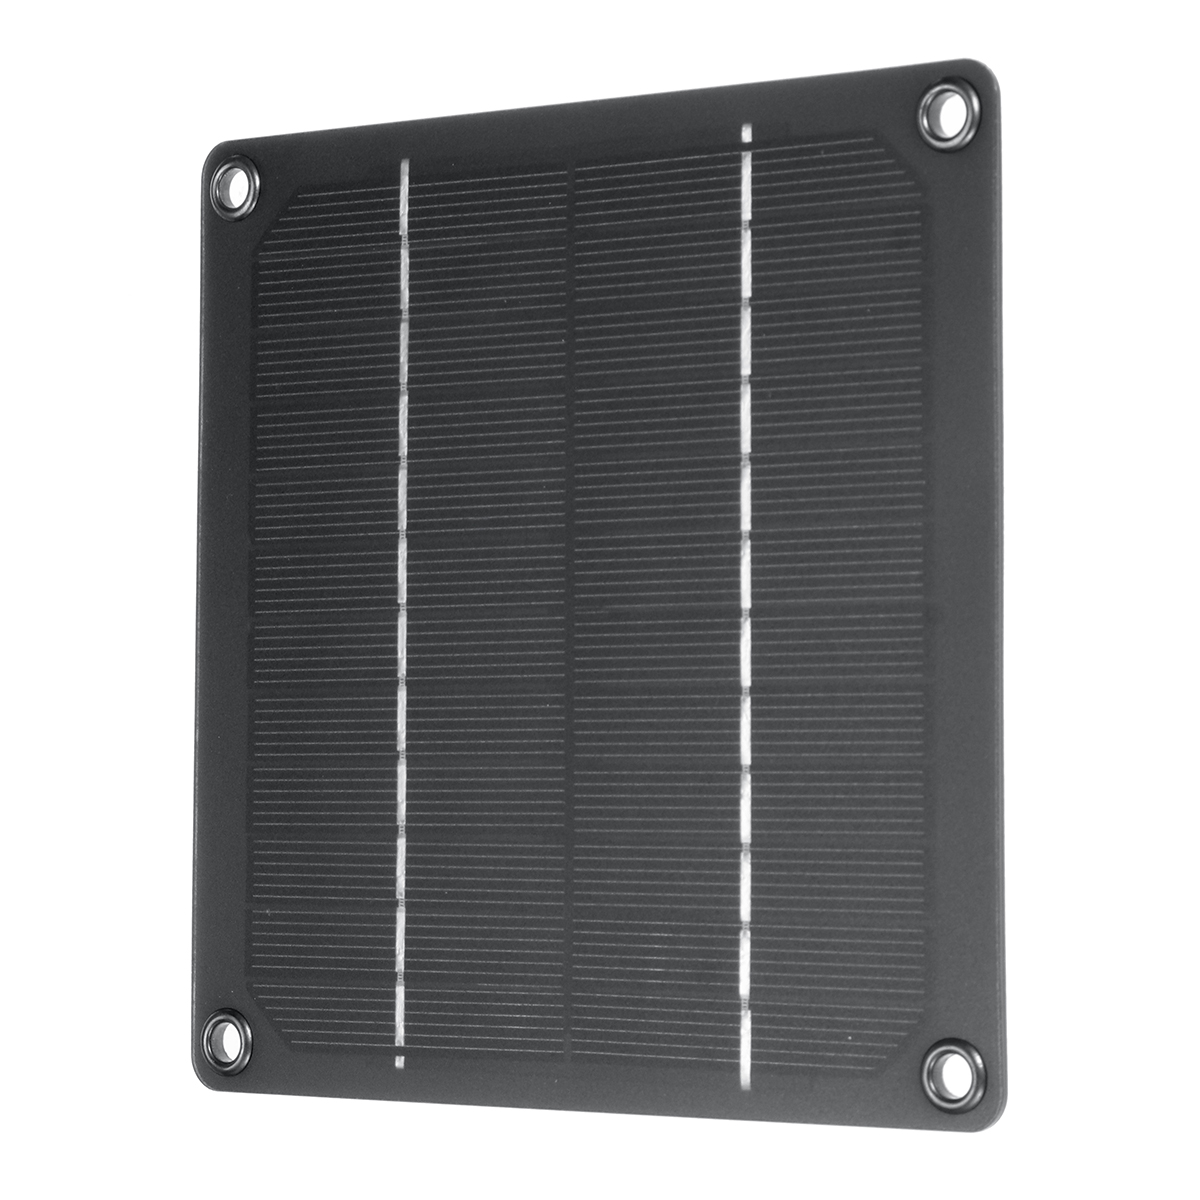 5W-Outdoor-Solar-Powered-Panel-Exhaust-Roof-Attic-Fan-For-Air-Ventilation-Vent-1919375-6